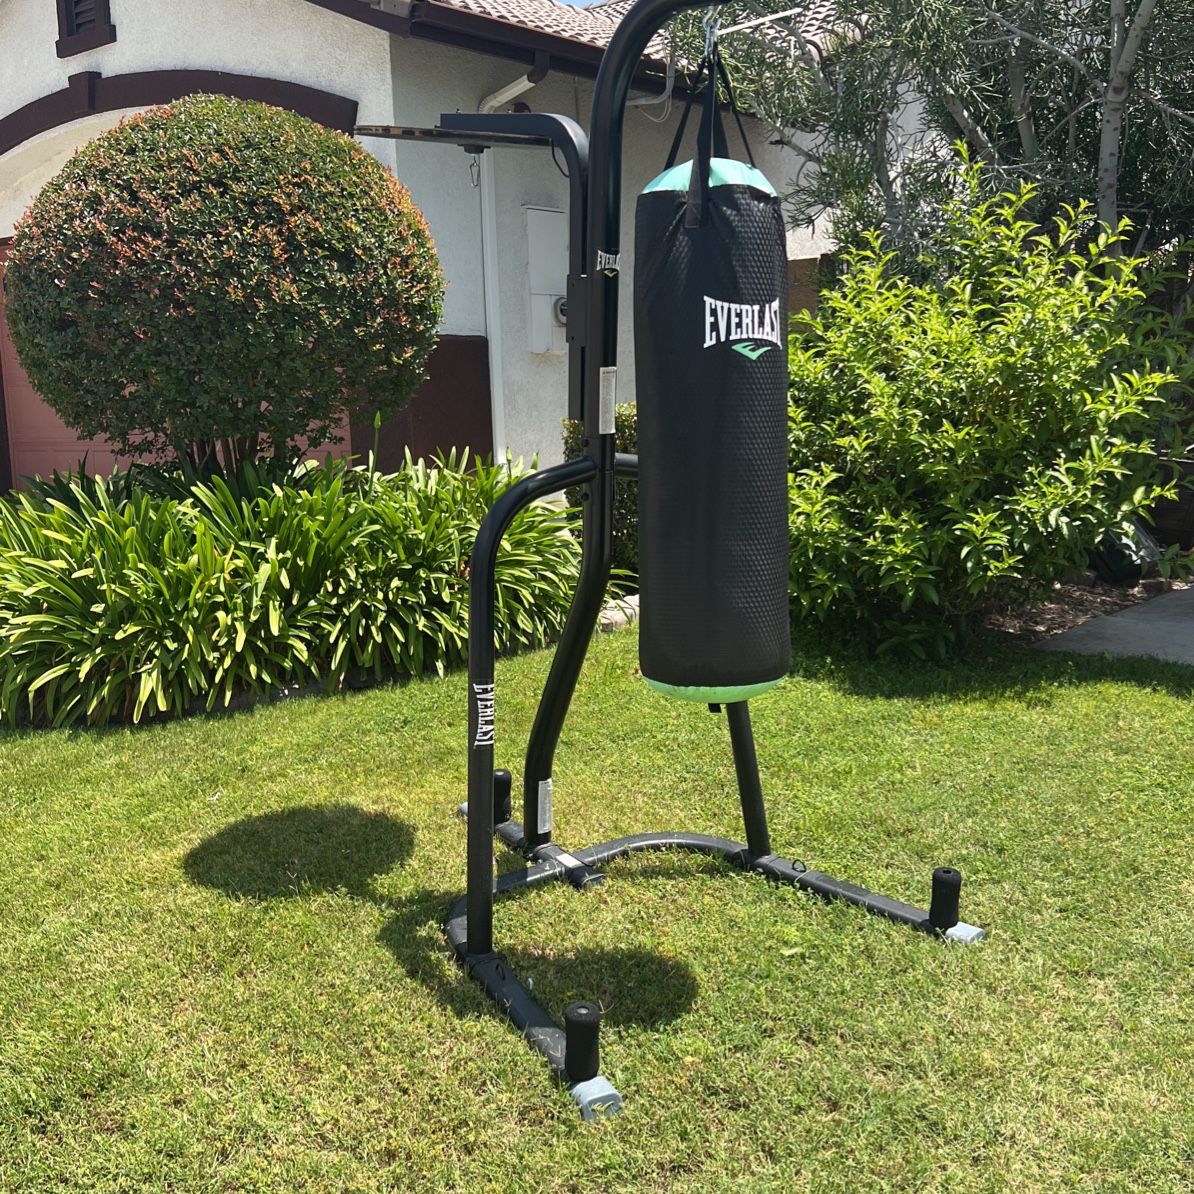 Everlast 75lb punching Bag  With Stand Included